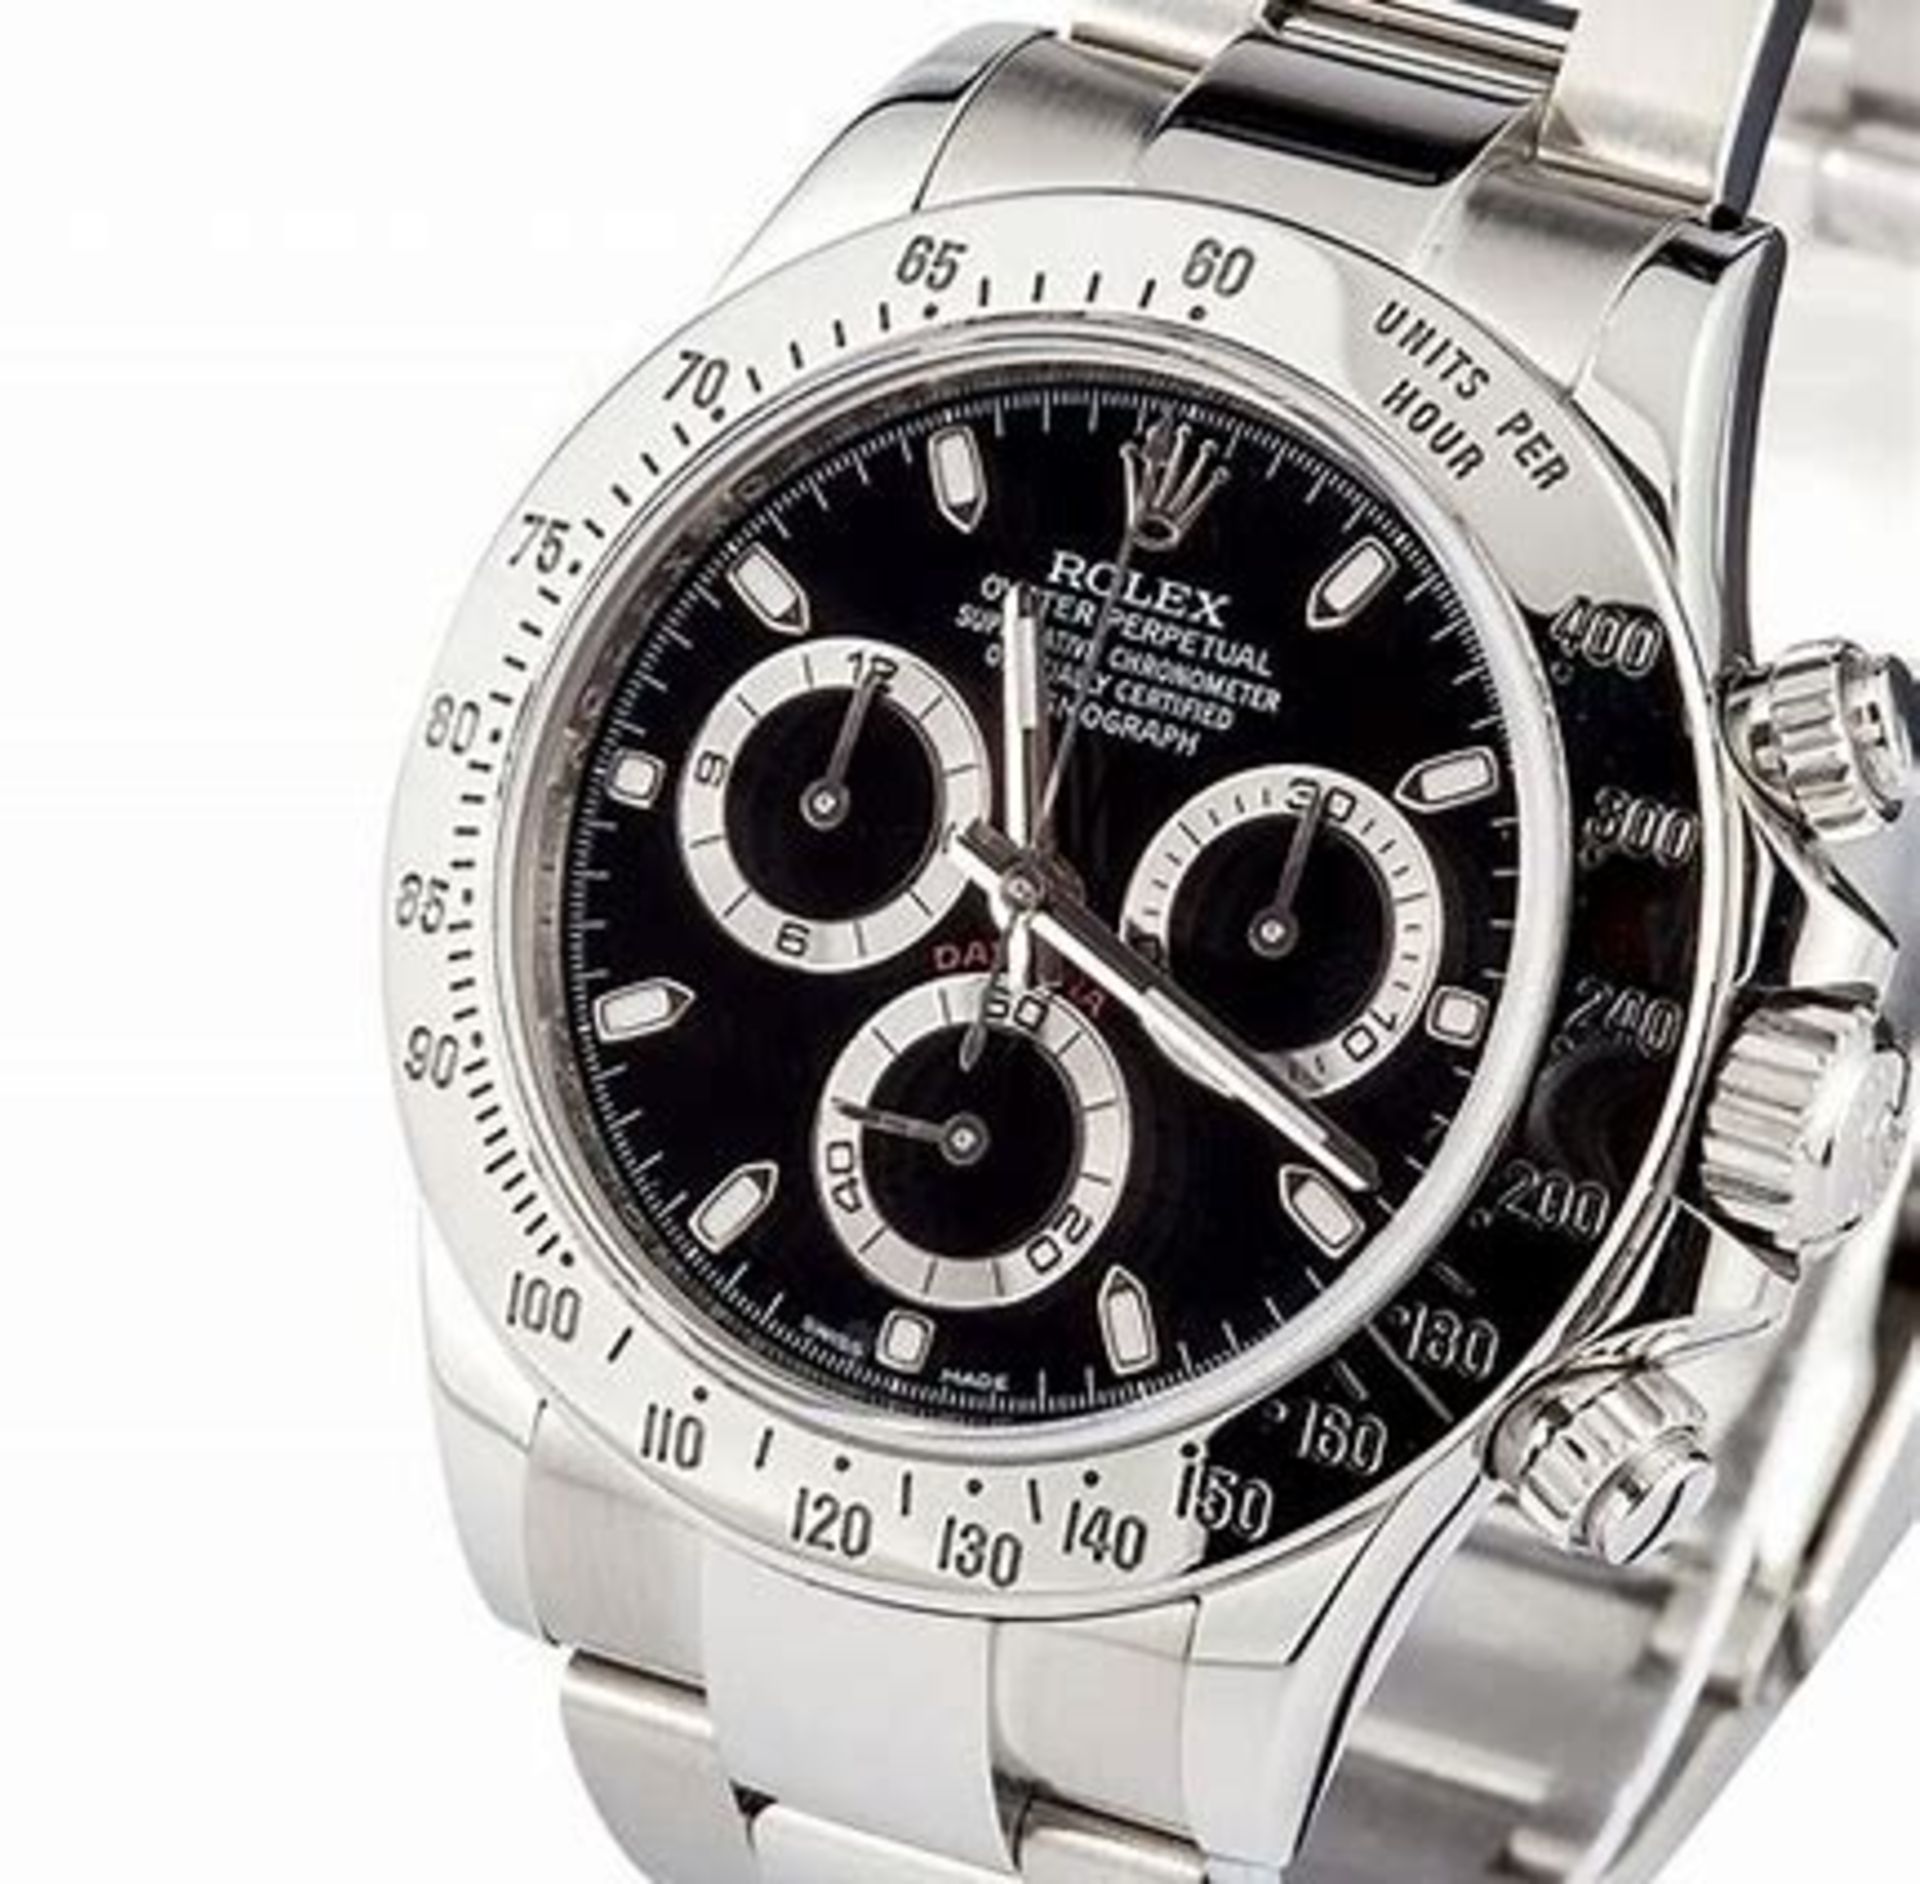 Gents Rolex Daytona Wrist Watch, With Box And Original Papers - Image 2 of 9